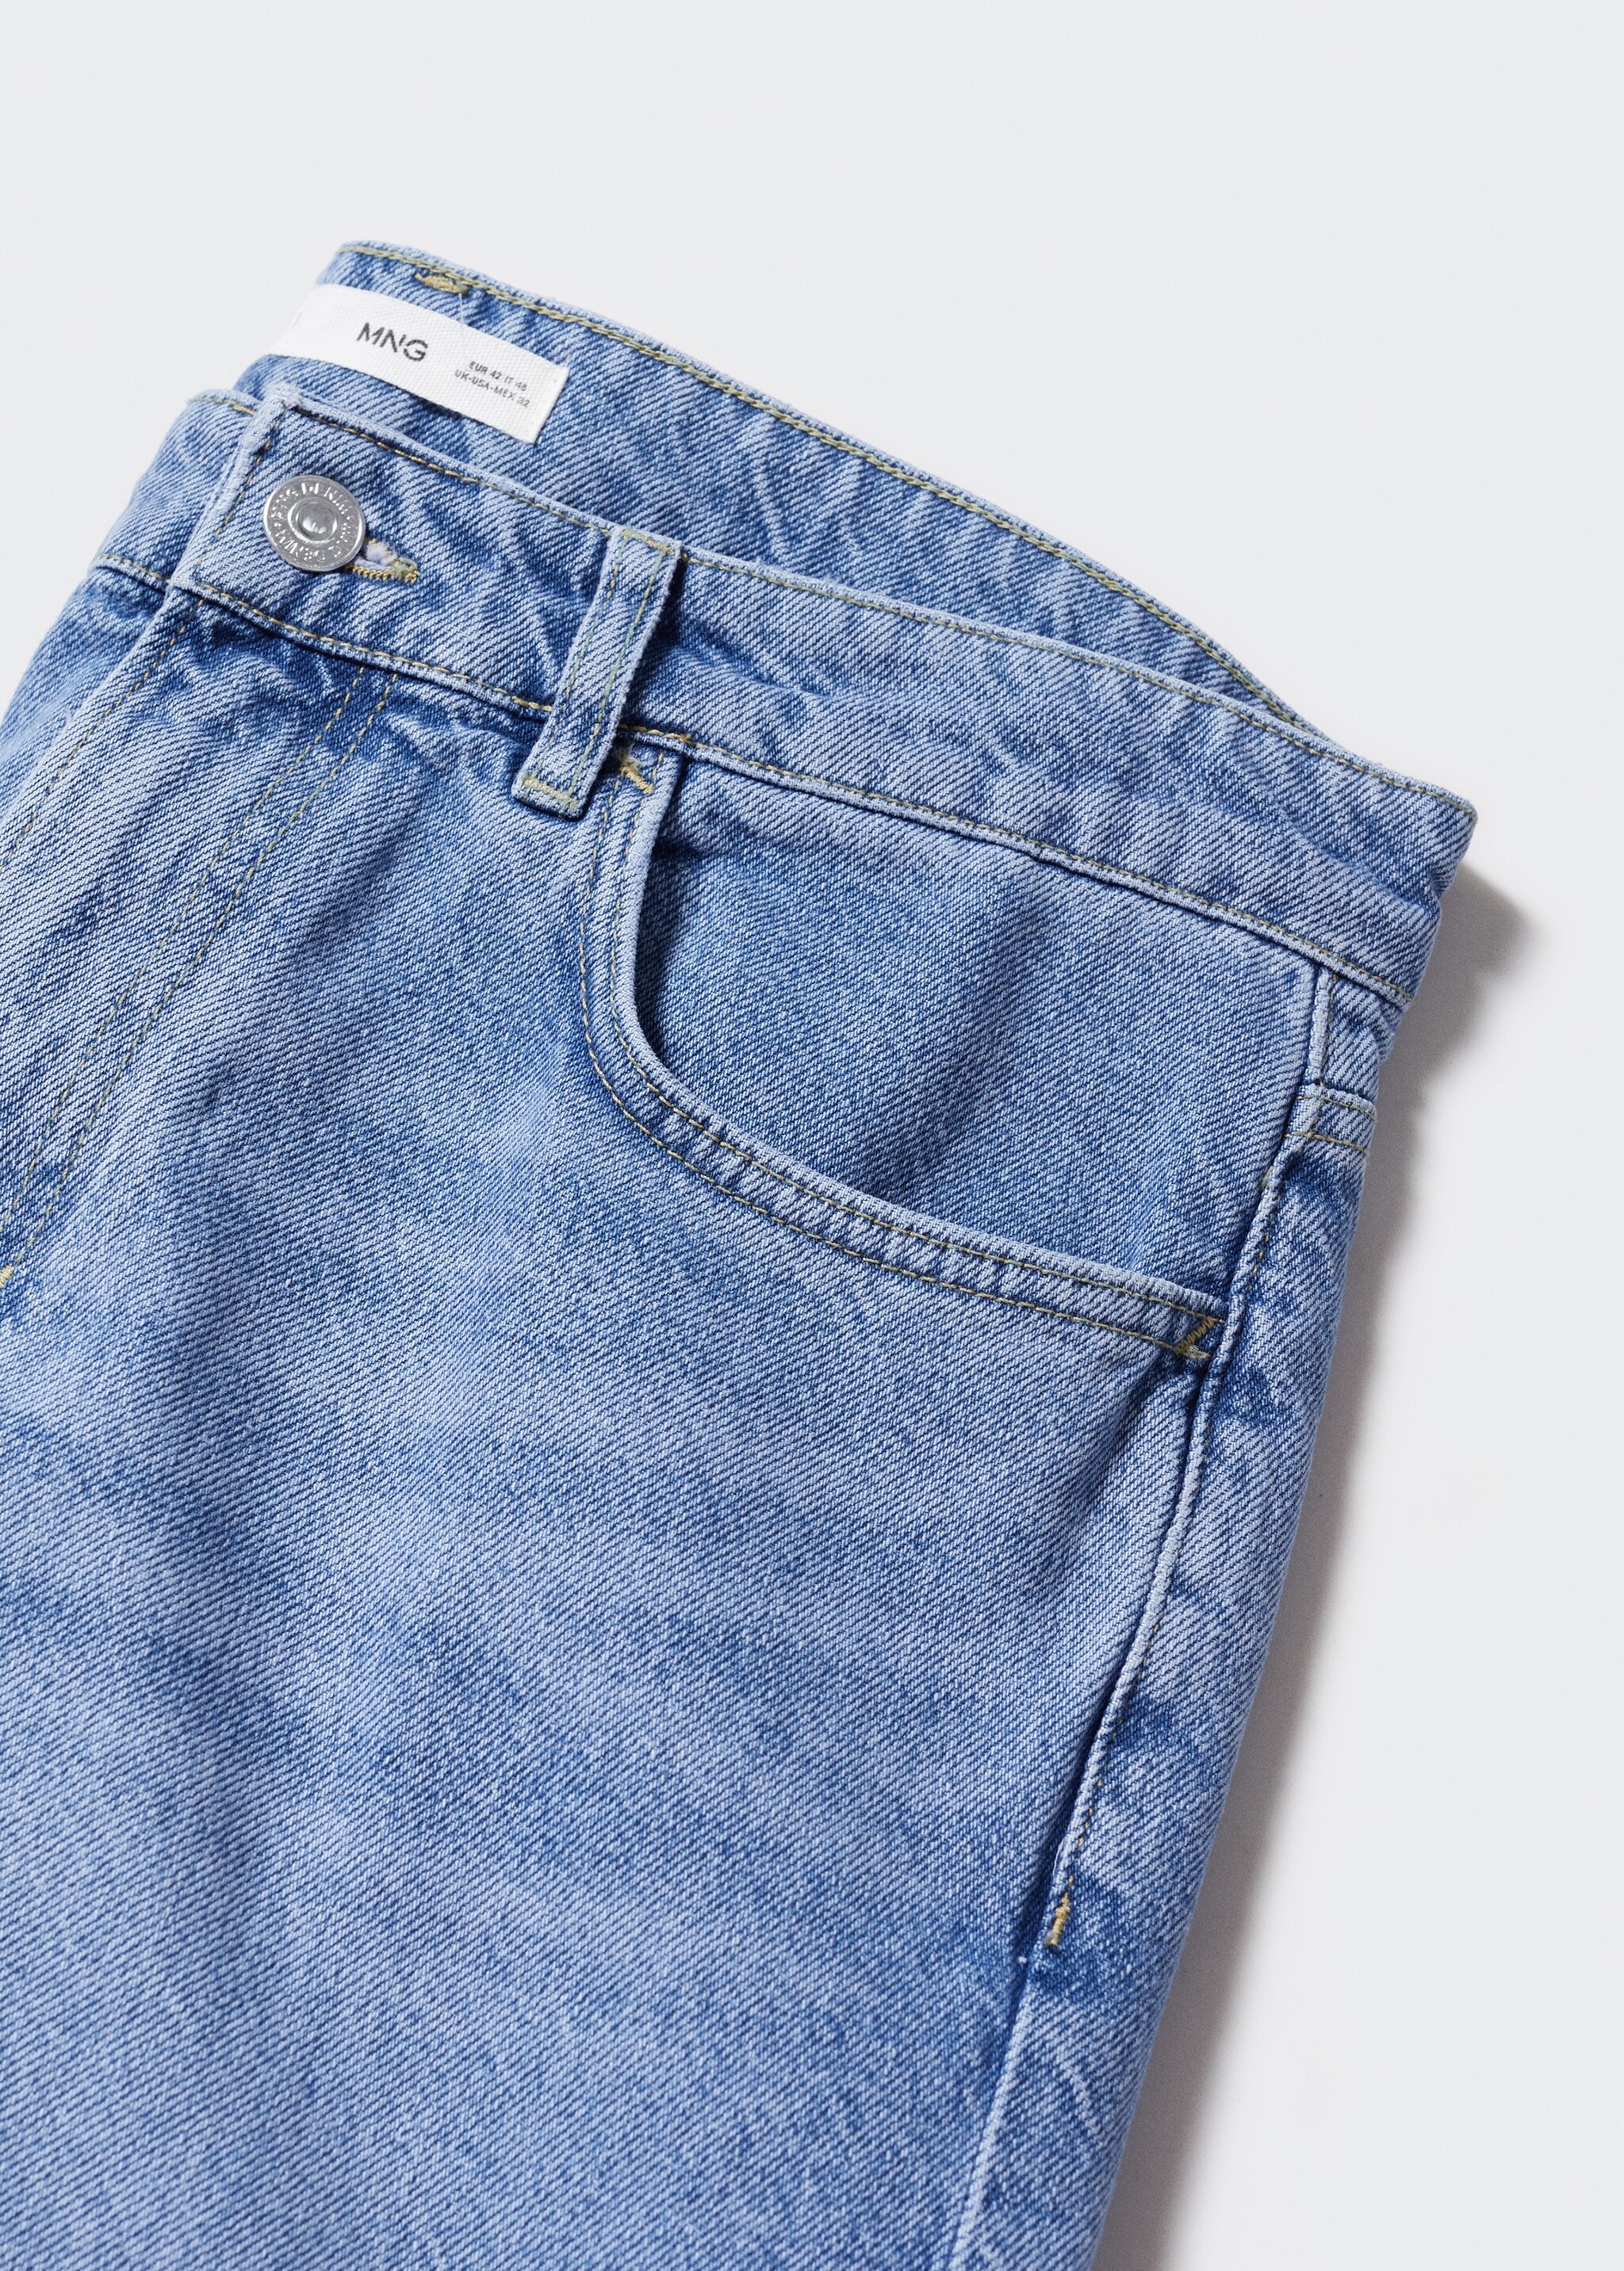 Carrot-fit jeans - Details of the article 8